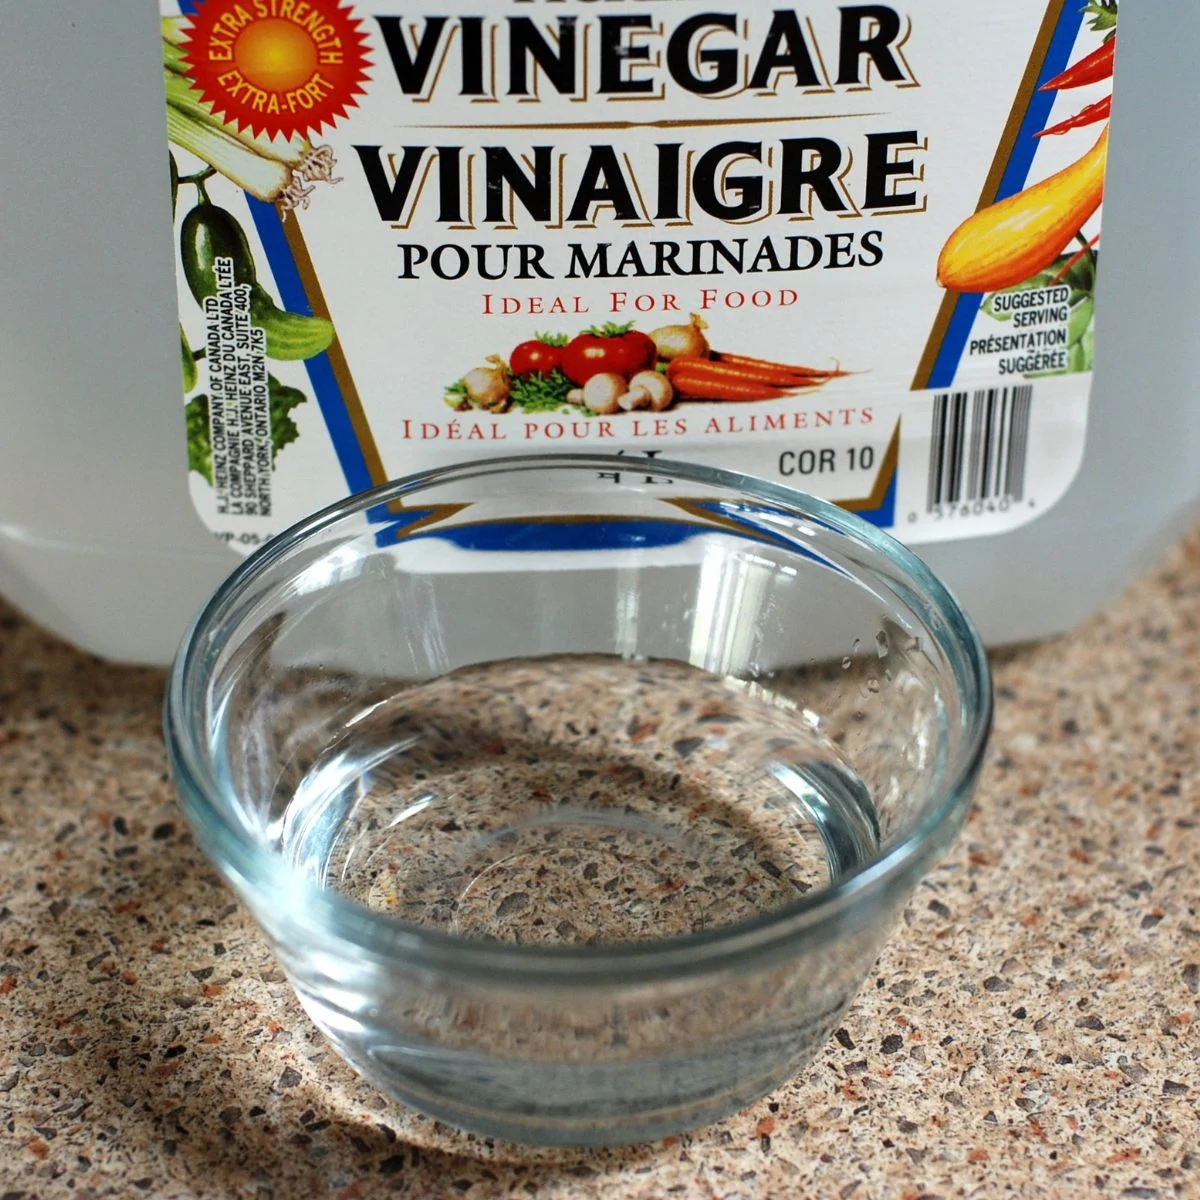 Make a descaling solution using vinegar and water